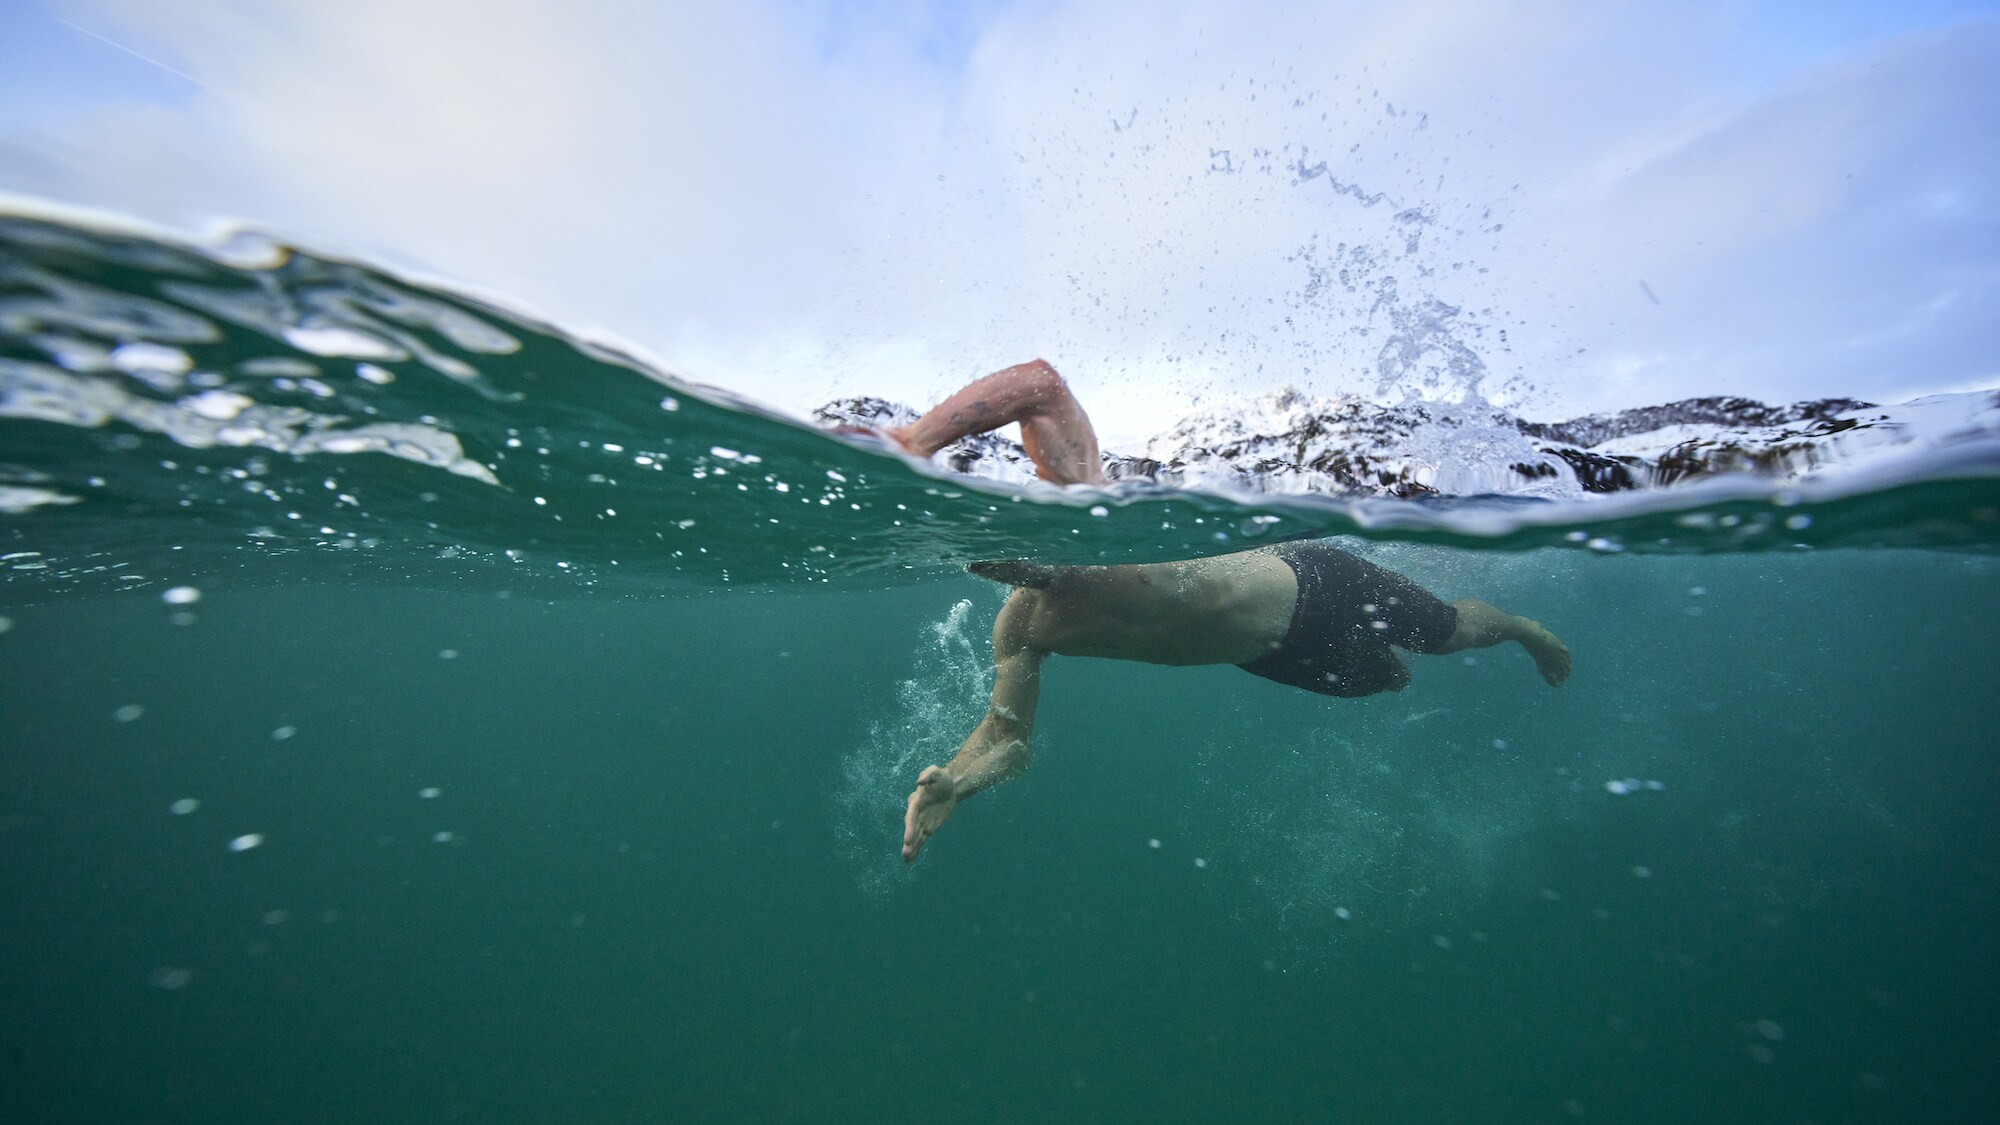 Chris Hemsworth swims in the freezing water in Norway. (National Geographic for Disney+/Craig Parry)